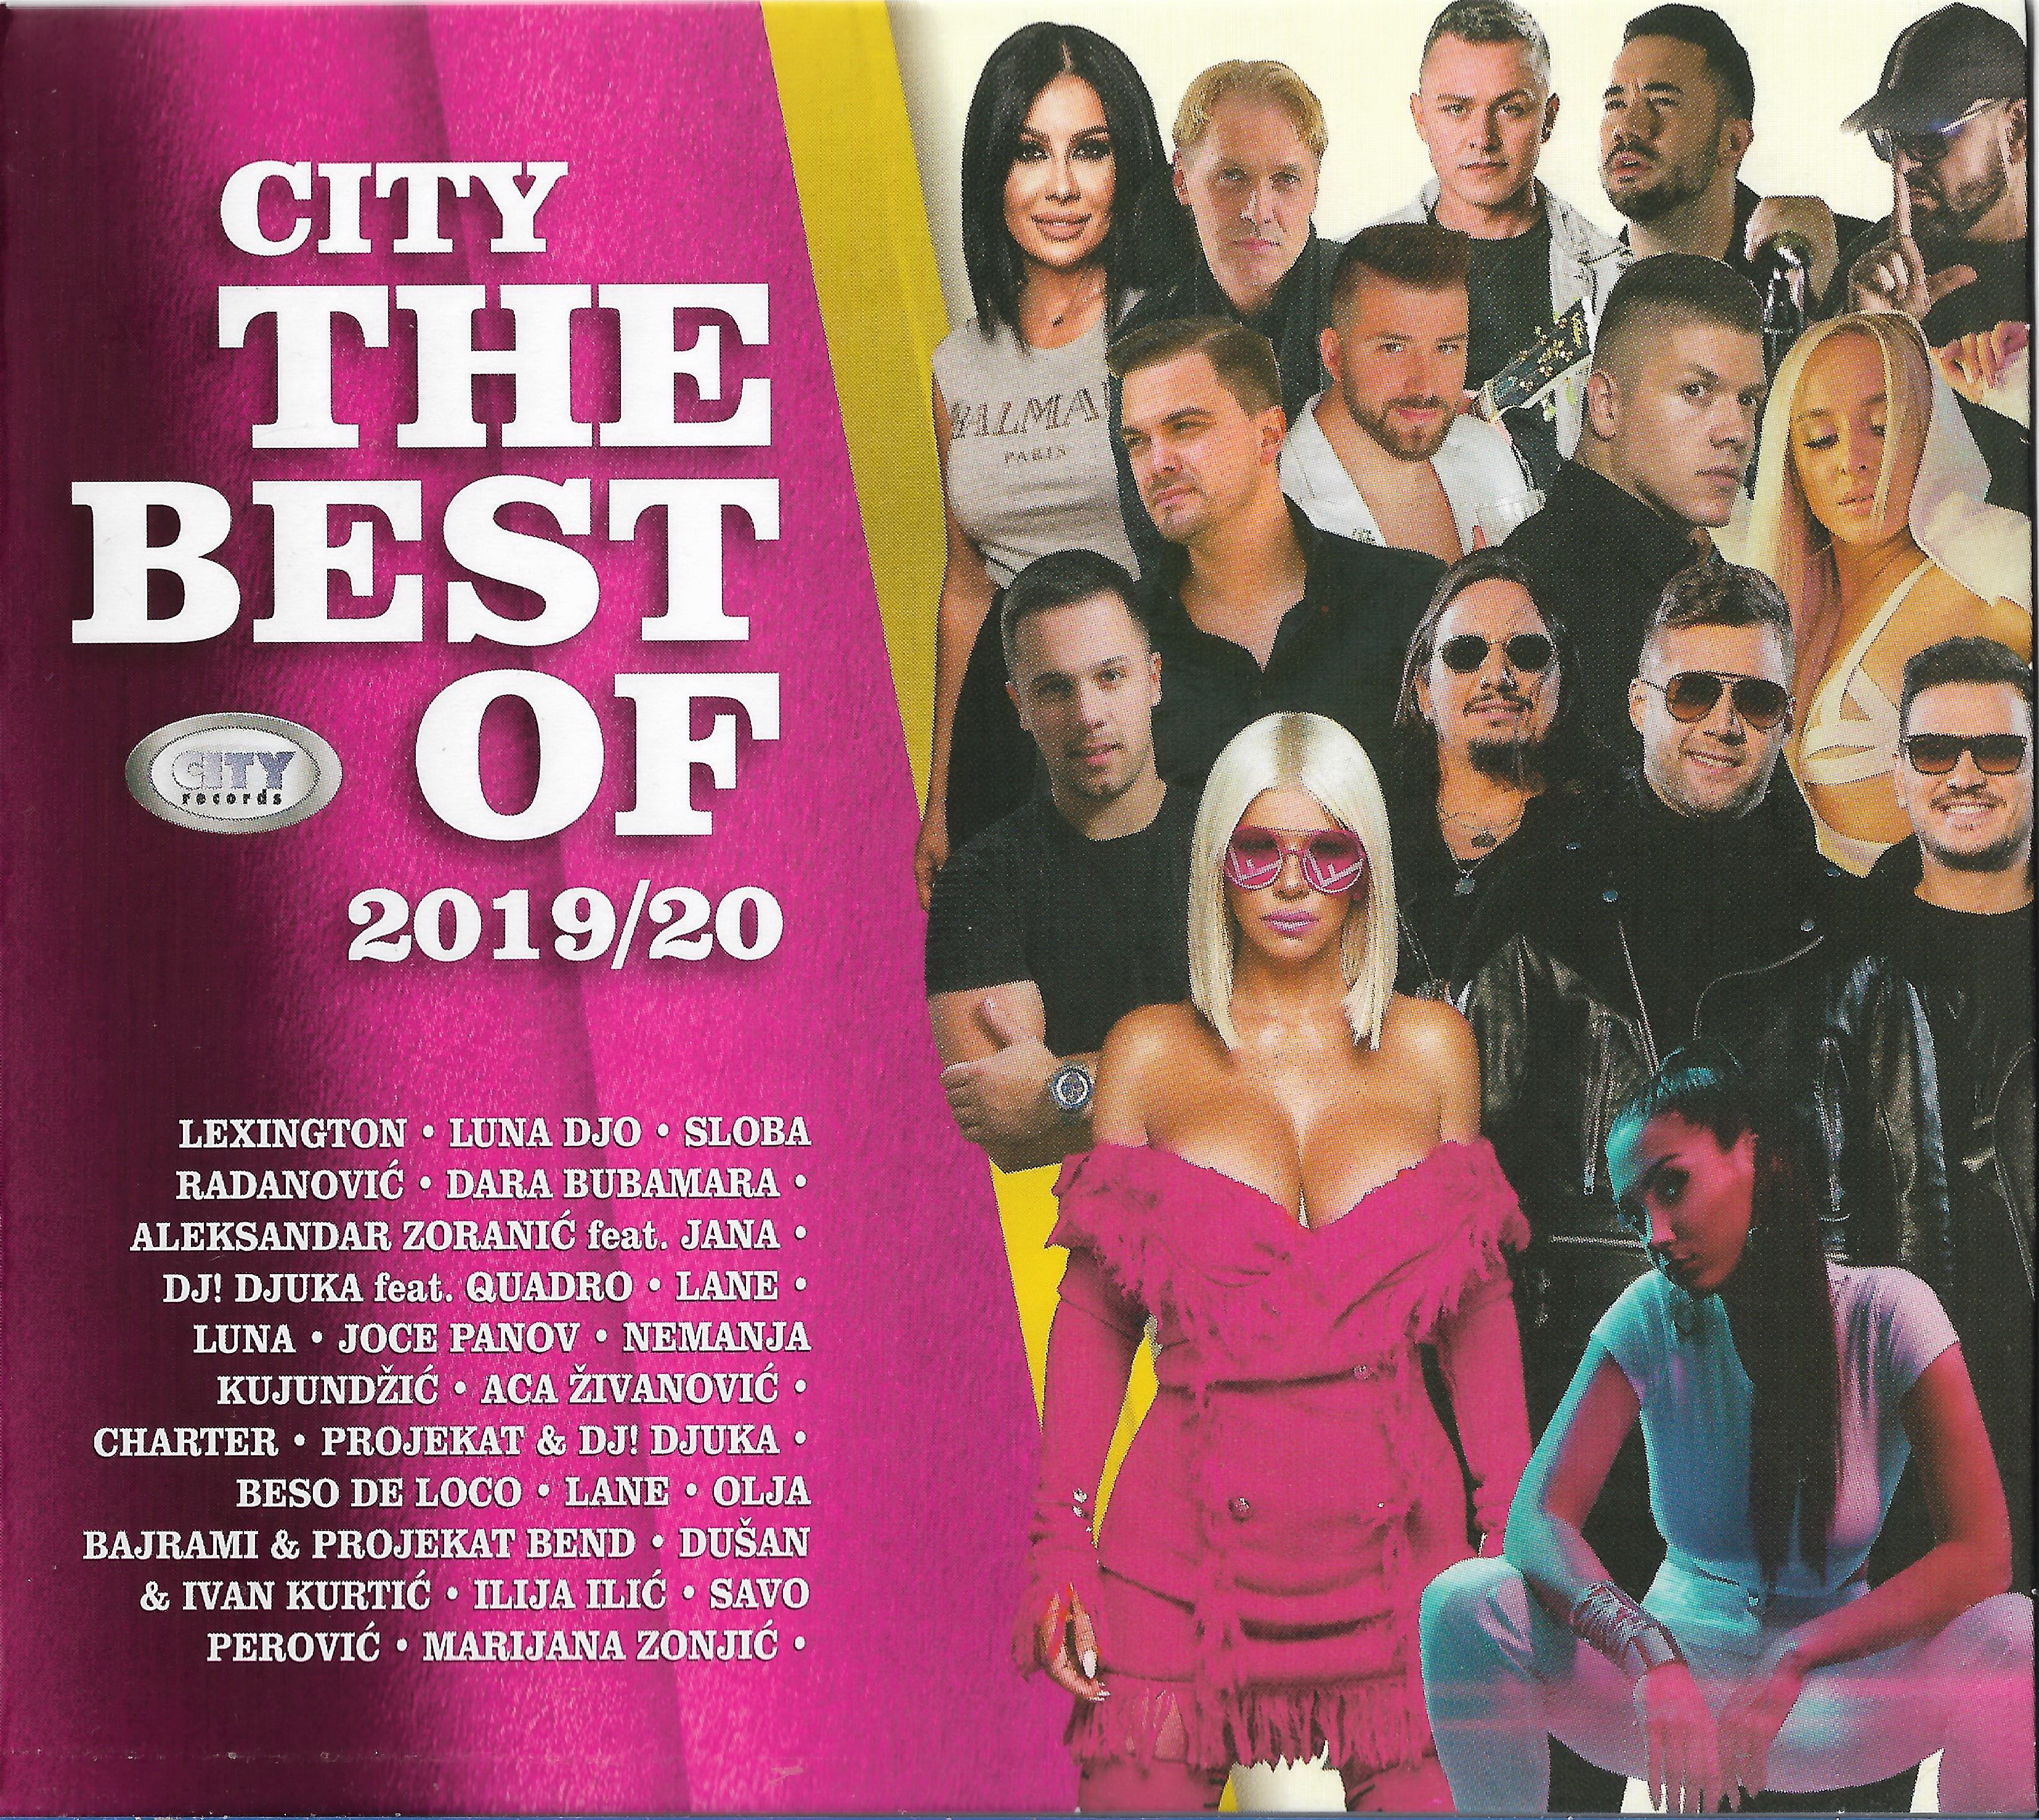 City The Best Of 201920 1 a